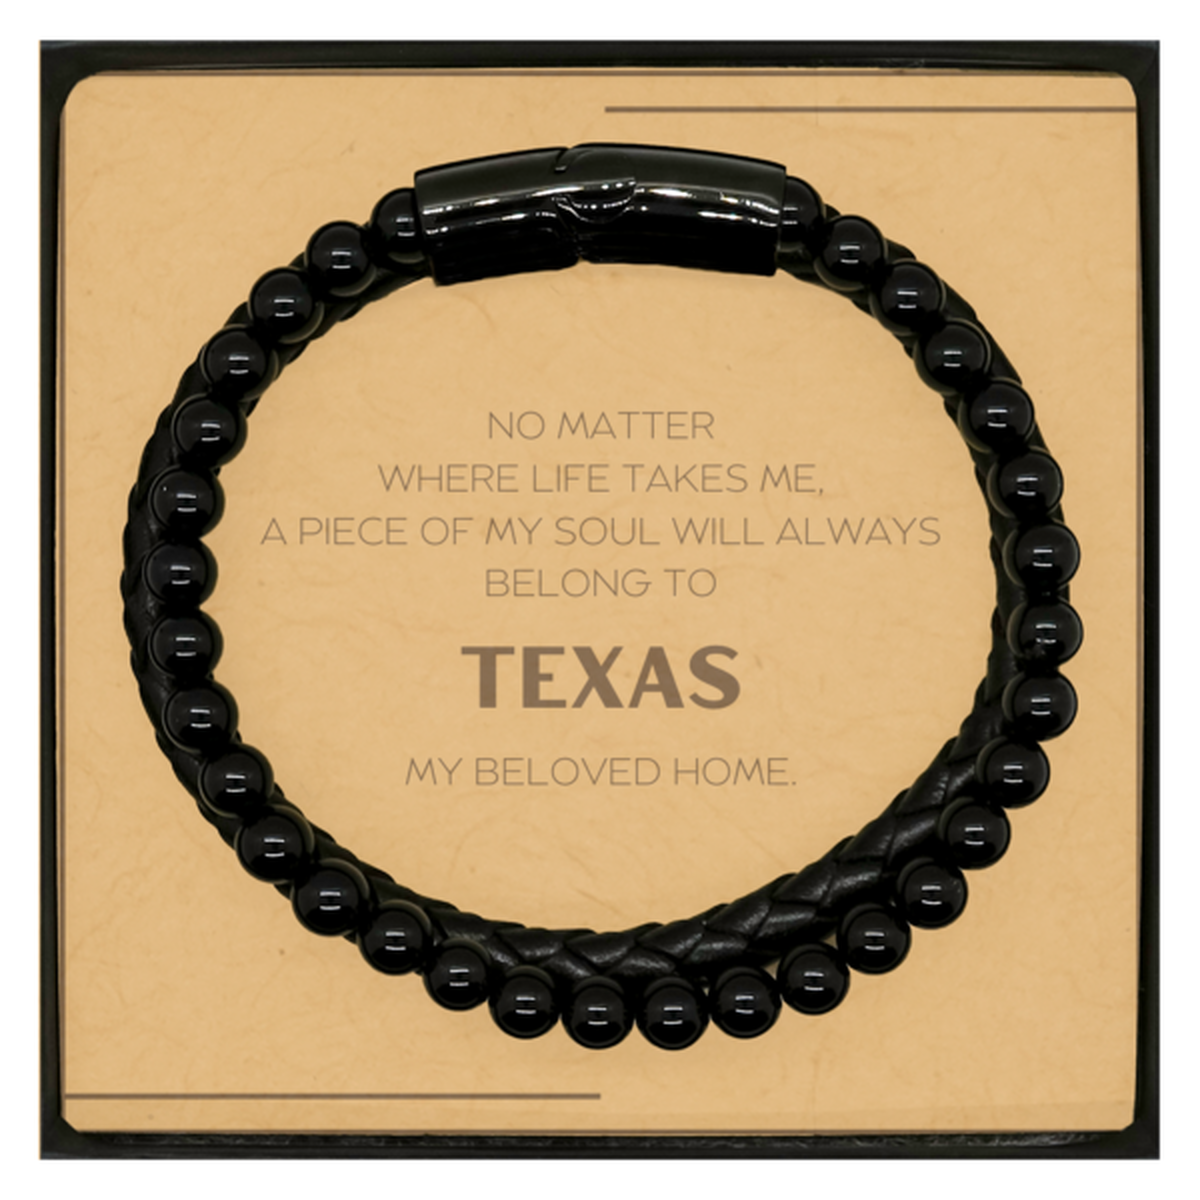 Love Texas State Gifts, My soul will always belong to Texas, Proud Stone Leather Bracelets, Birthday Christmas Unique Gifts For Texas Men, Women, Friends